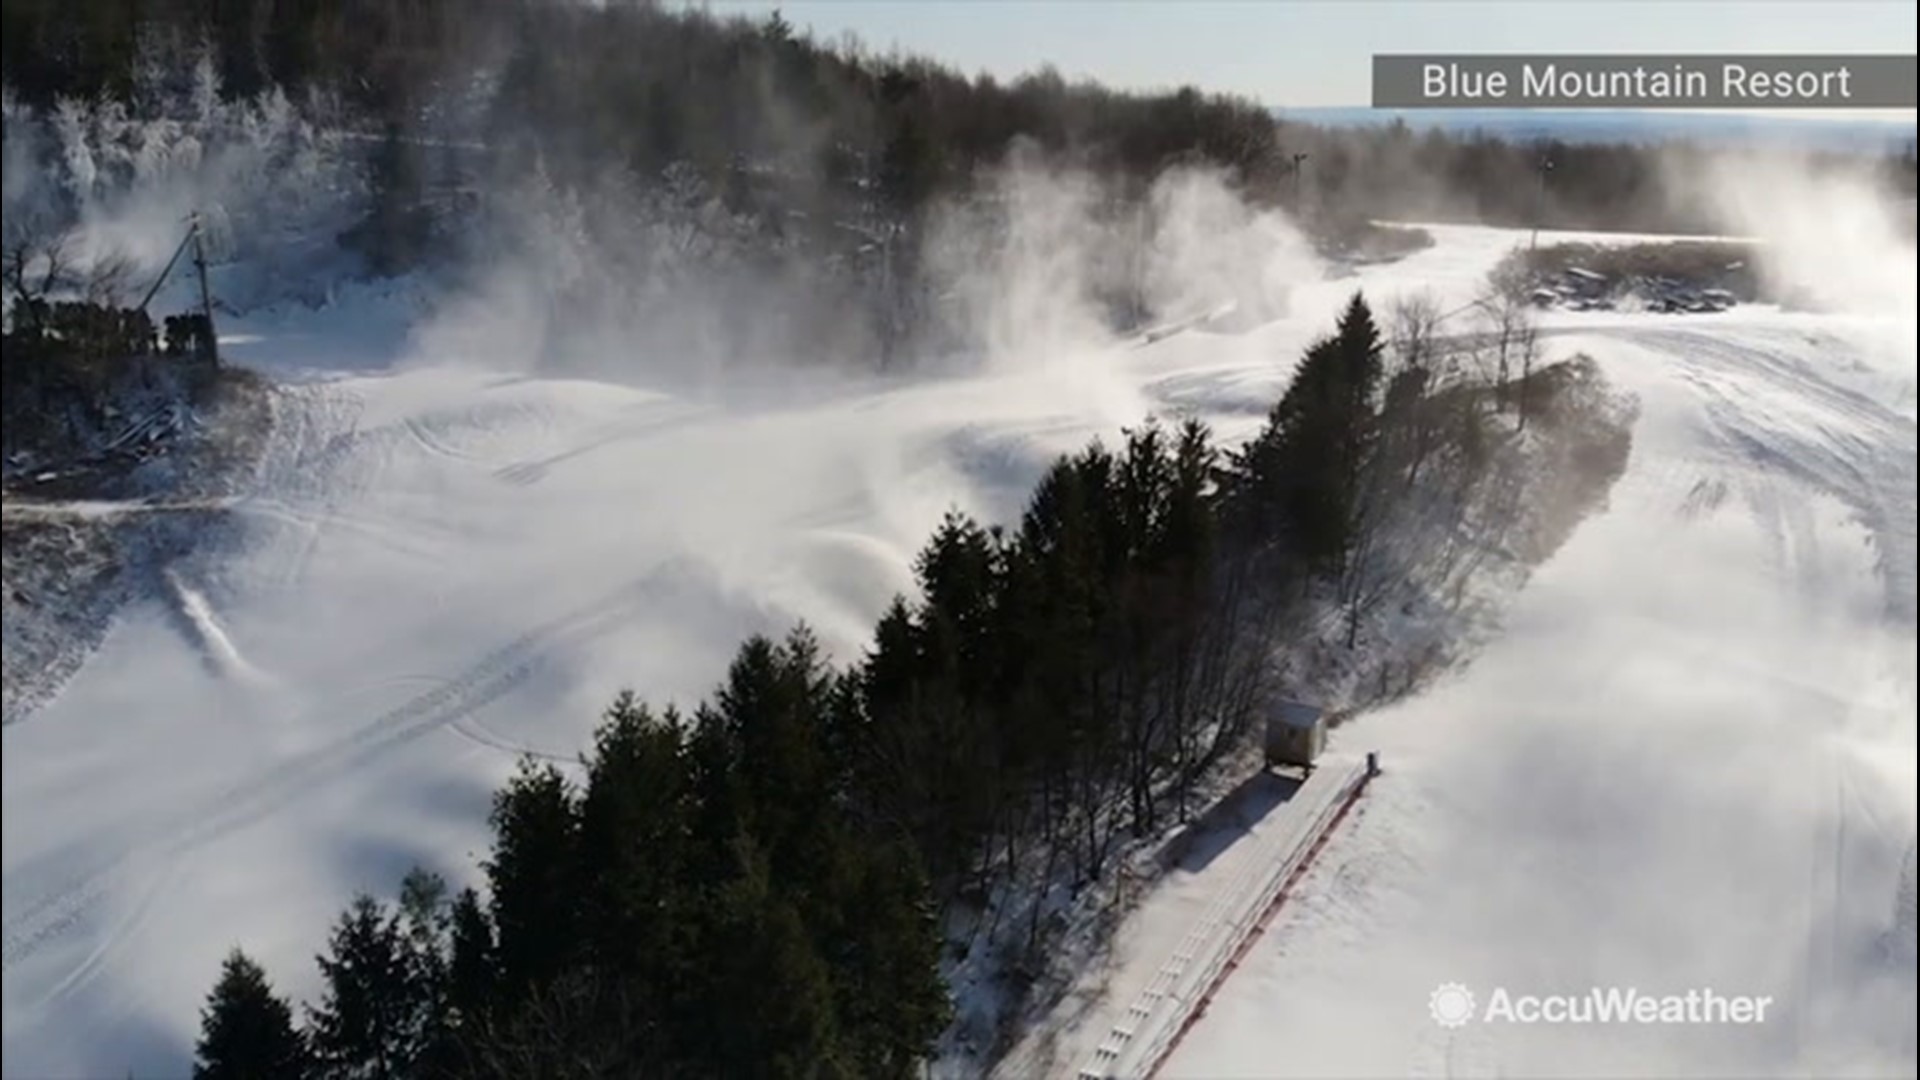 A number of ski resorts, including Blue Mountain Resort in Palmerton, Pennsylvania, started their snow guns as soon as the cold weather hit their areas. Some places are opening as early as Nov. 16!